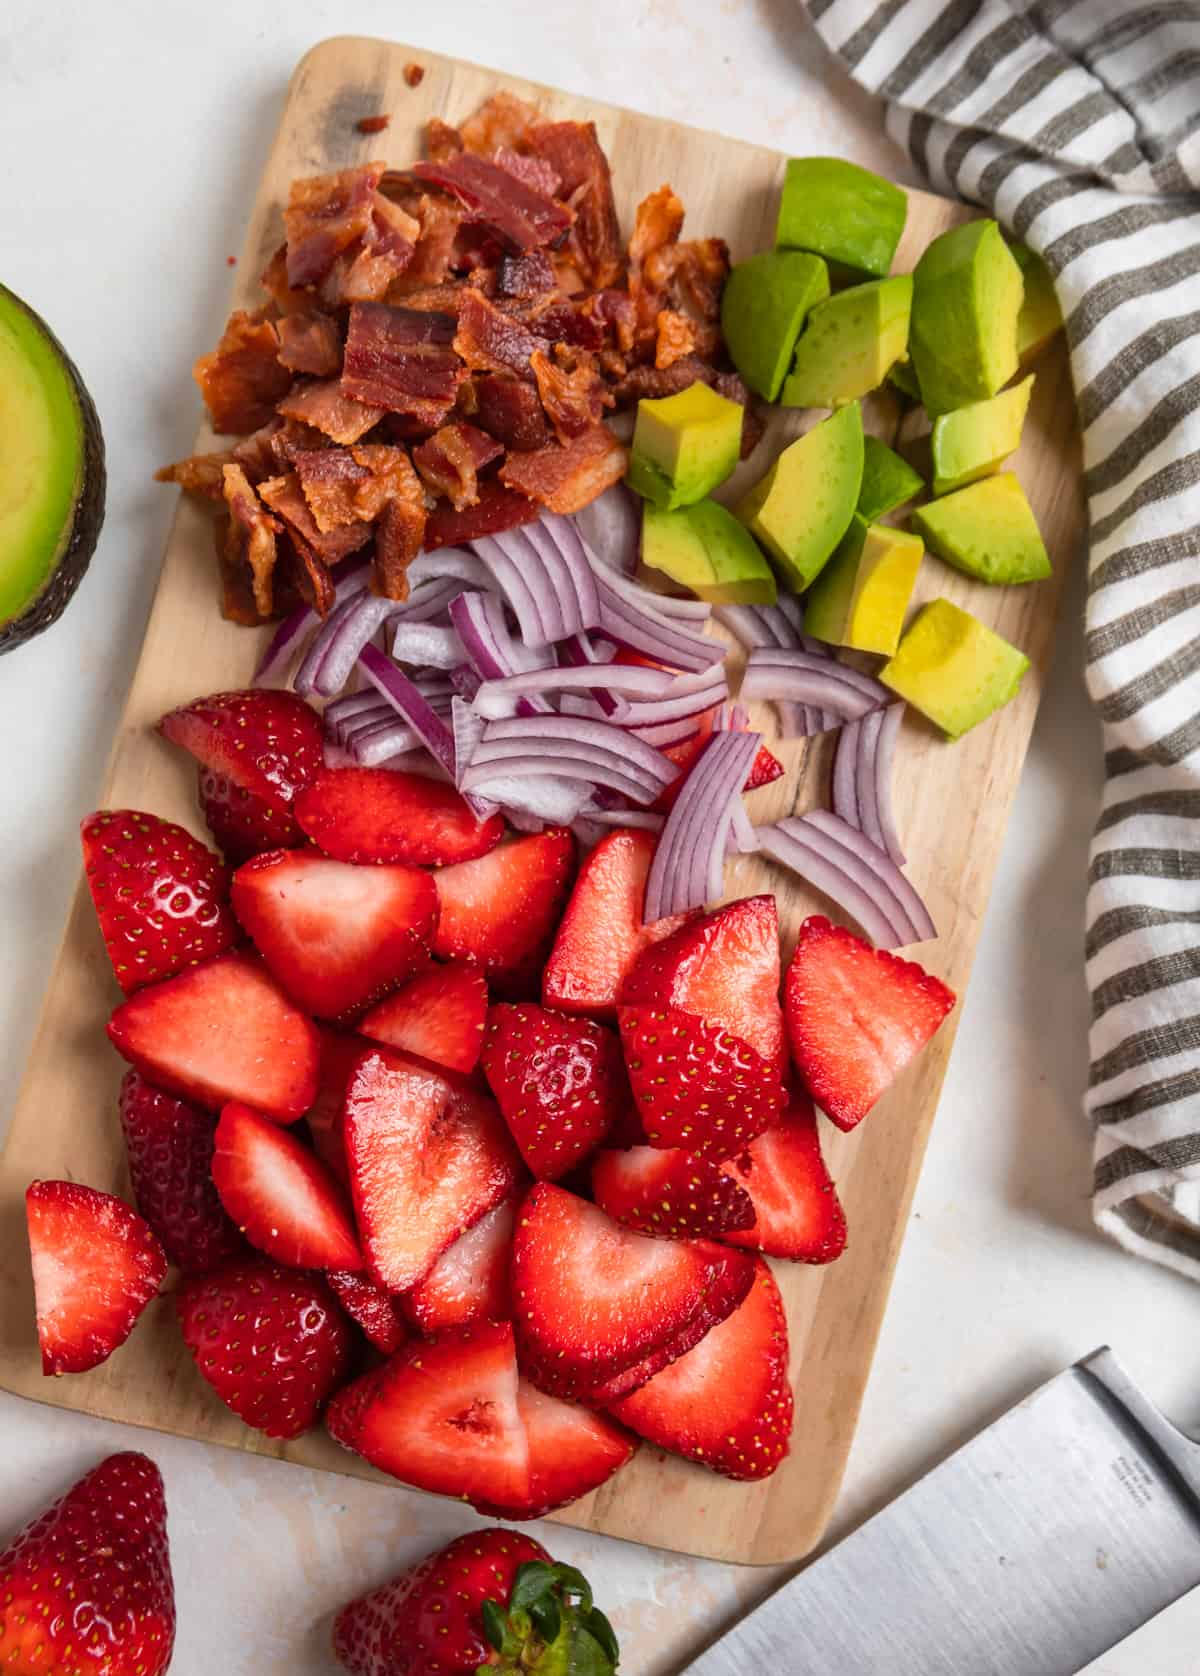 Cutting board with sliced strawberries, avocado, red onion, and bacon.